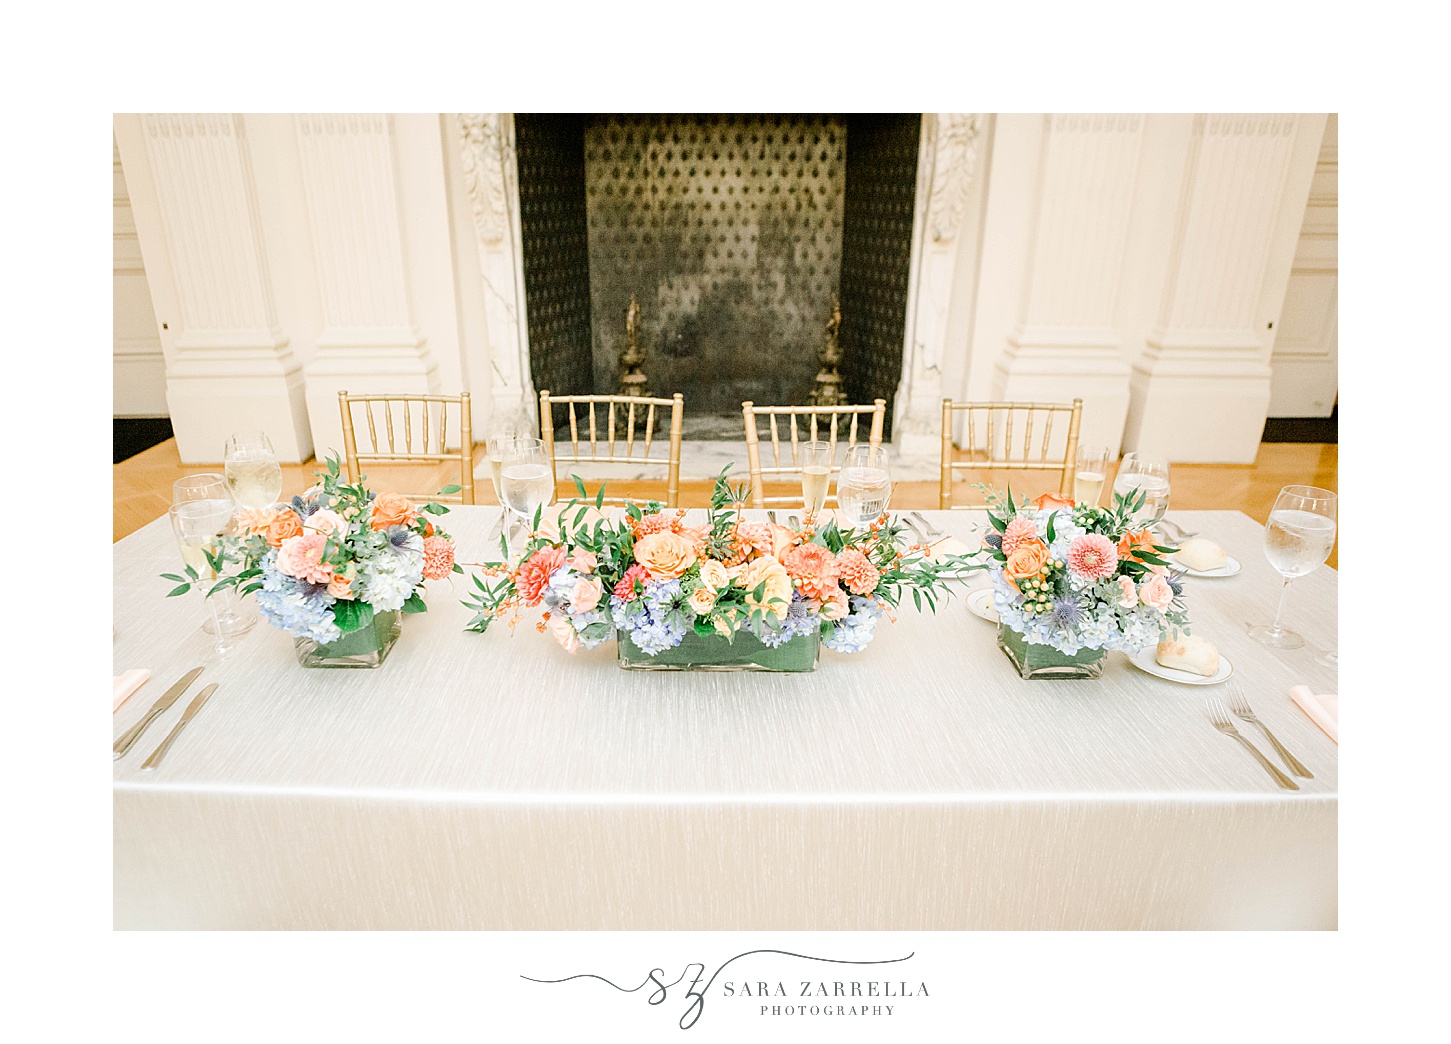 head table with pink and blue floral displays